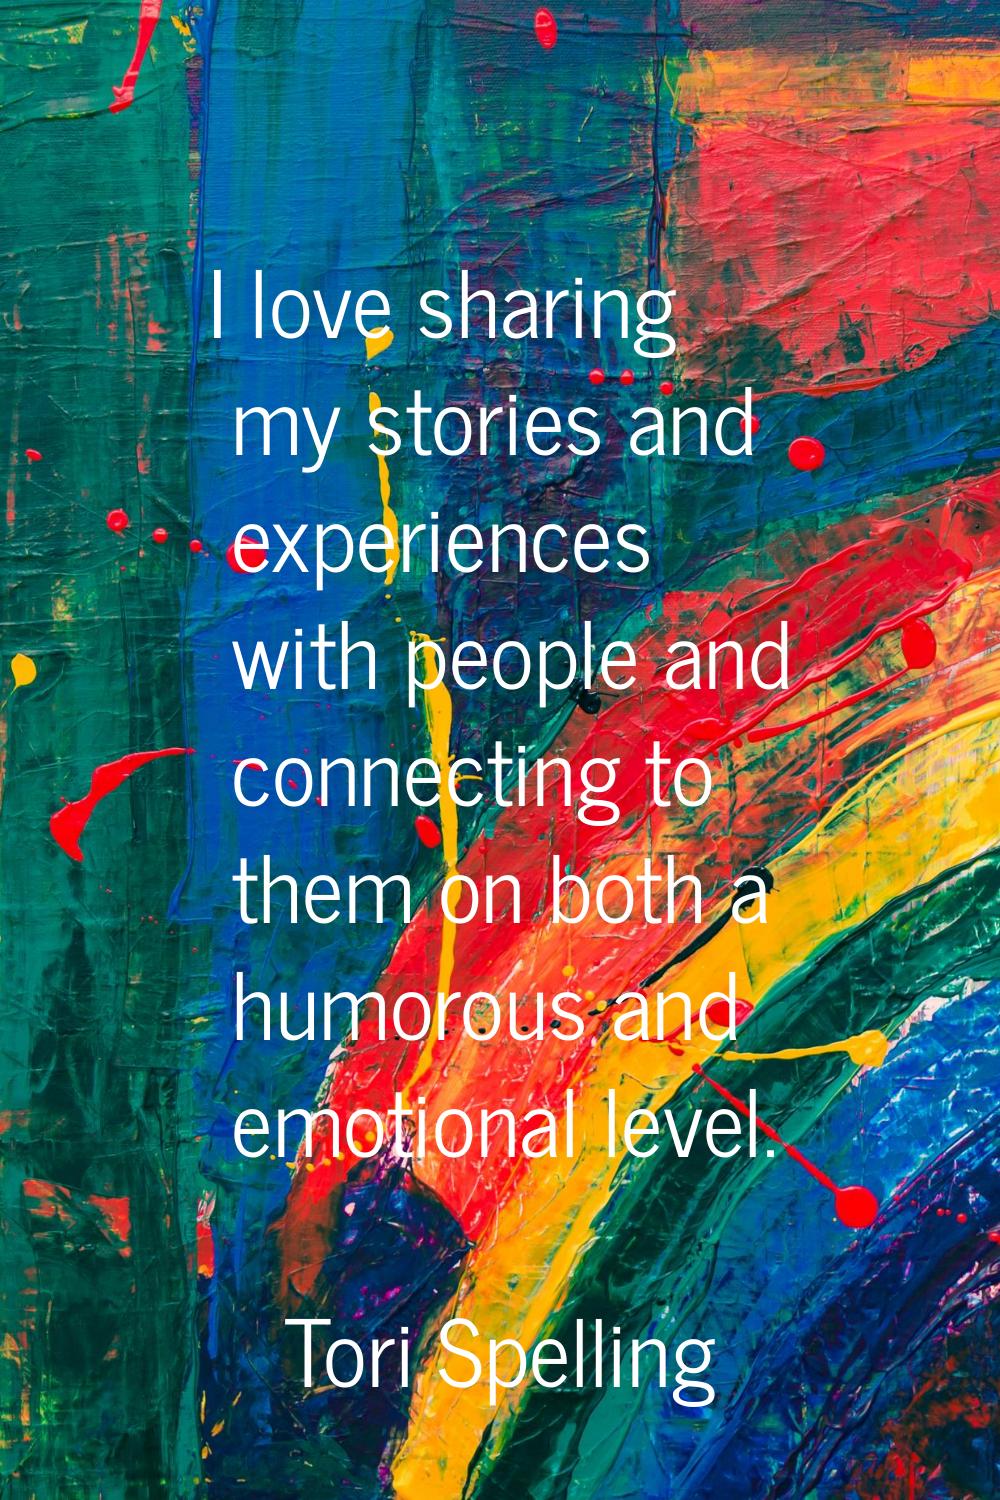 I love sharing my stories and experiences with people and connecting to them on both a humorous and